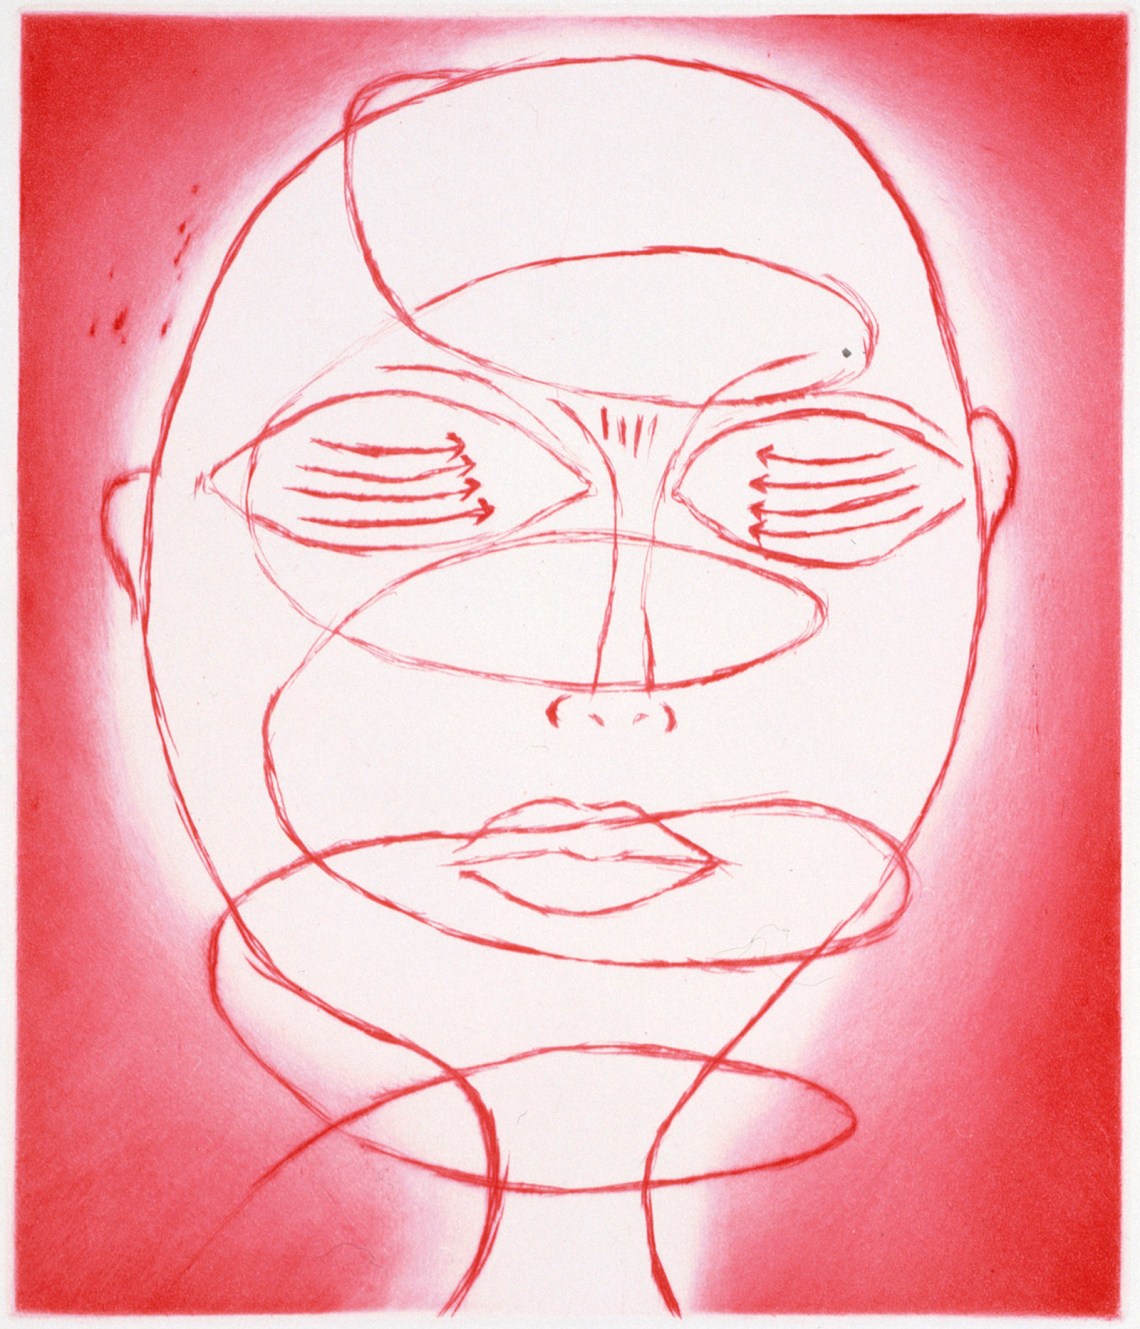 Spiraling Eyes; drypoint by Louise Bourgeois